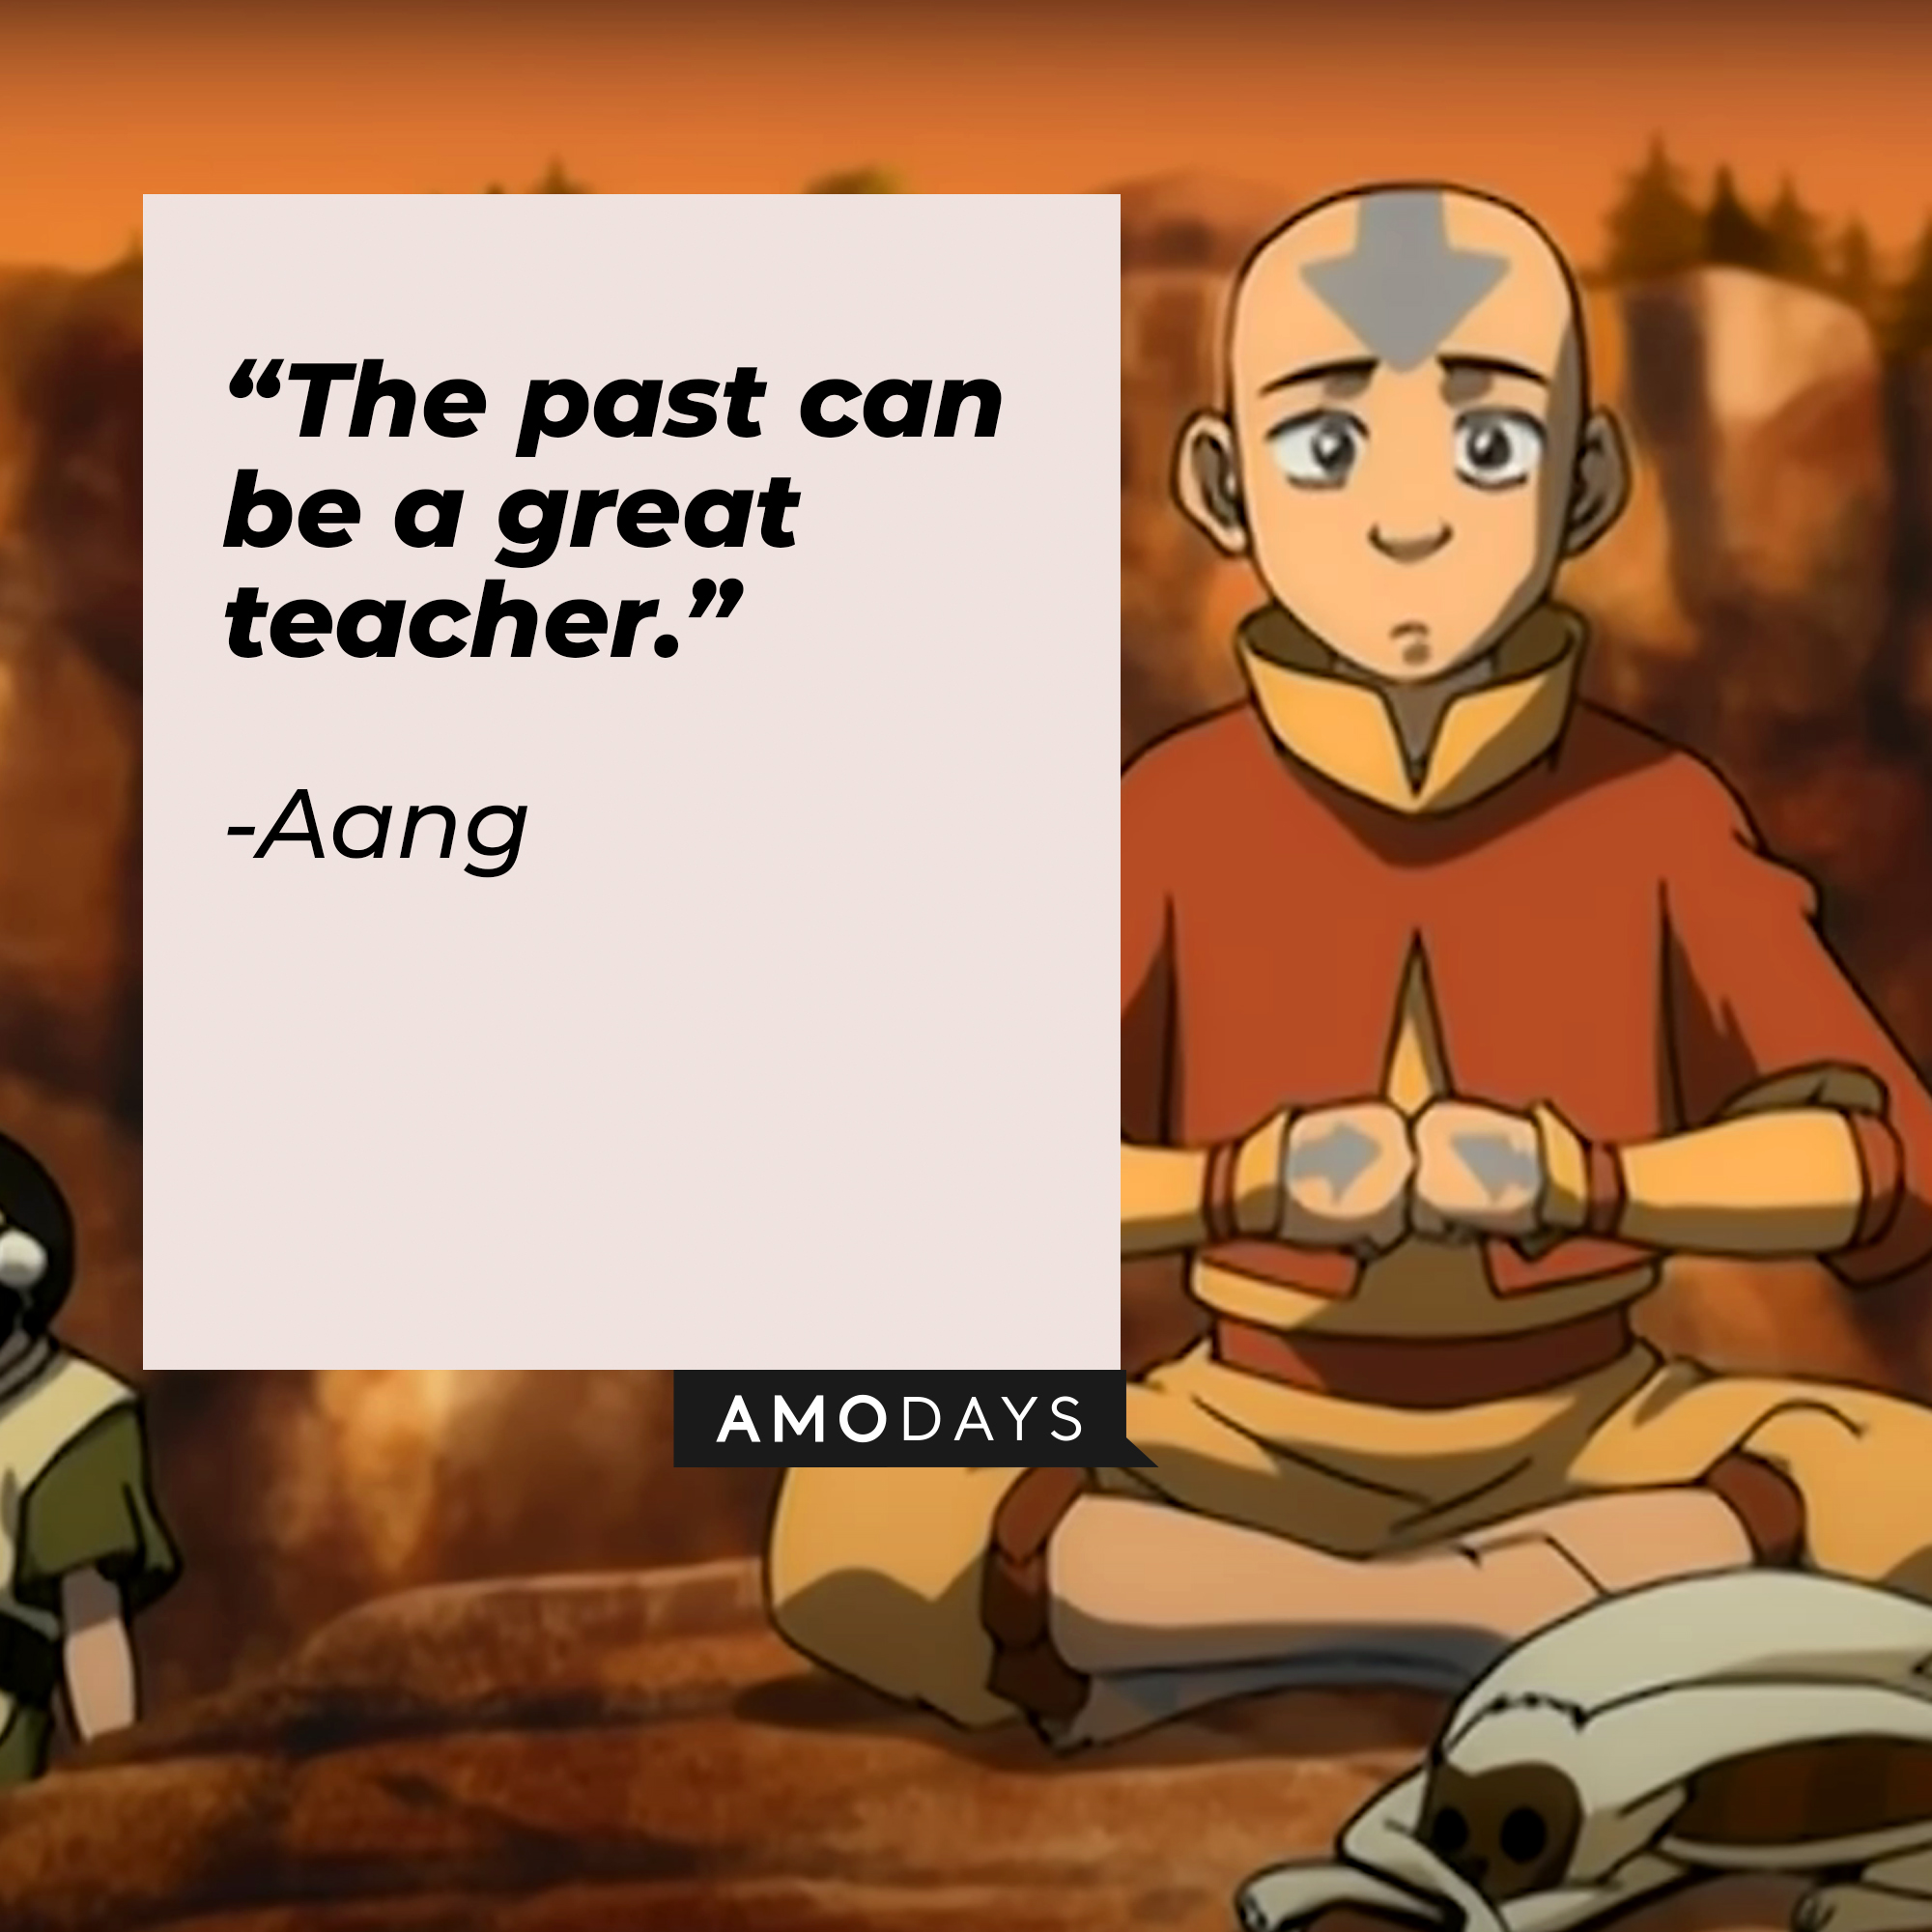 Aang’s quote: “The past can be a great teacher.” | Source: Youtube.com/TeamAvatar